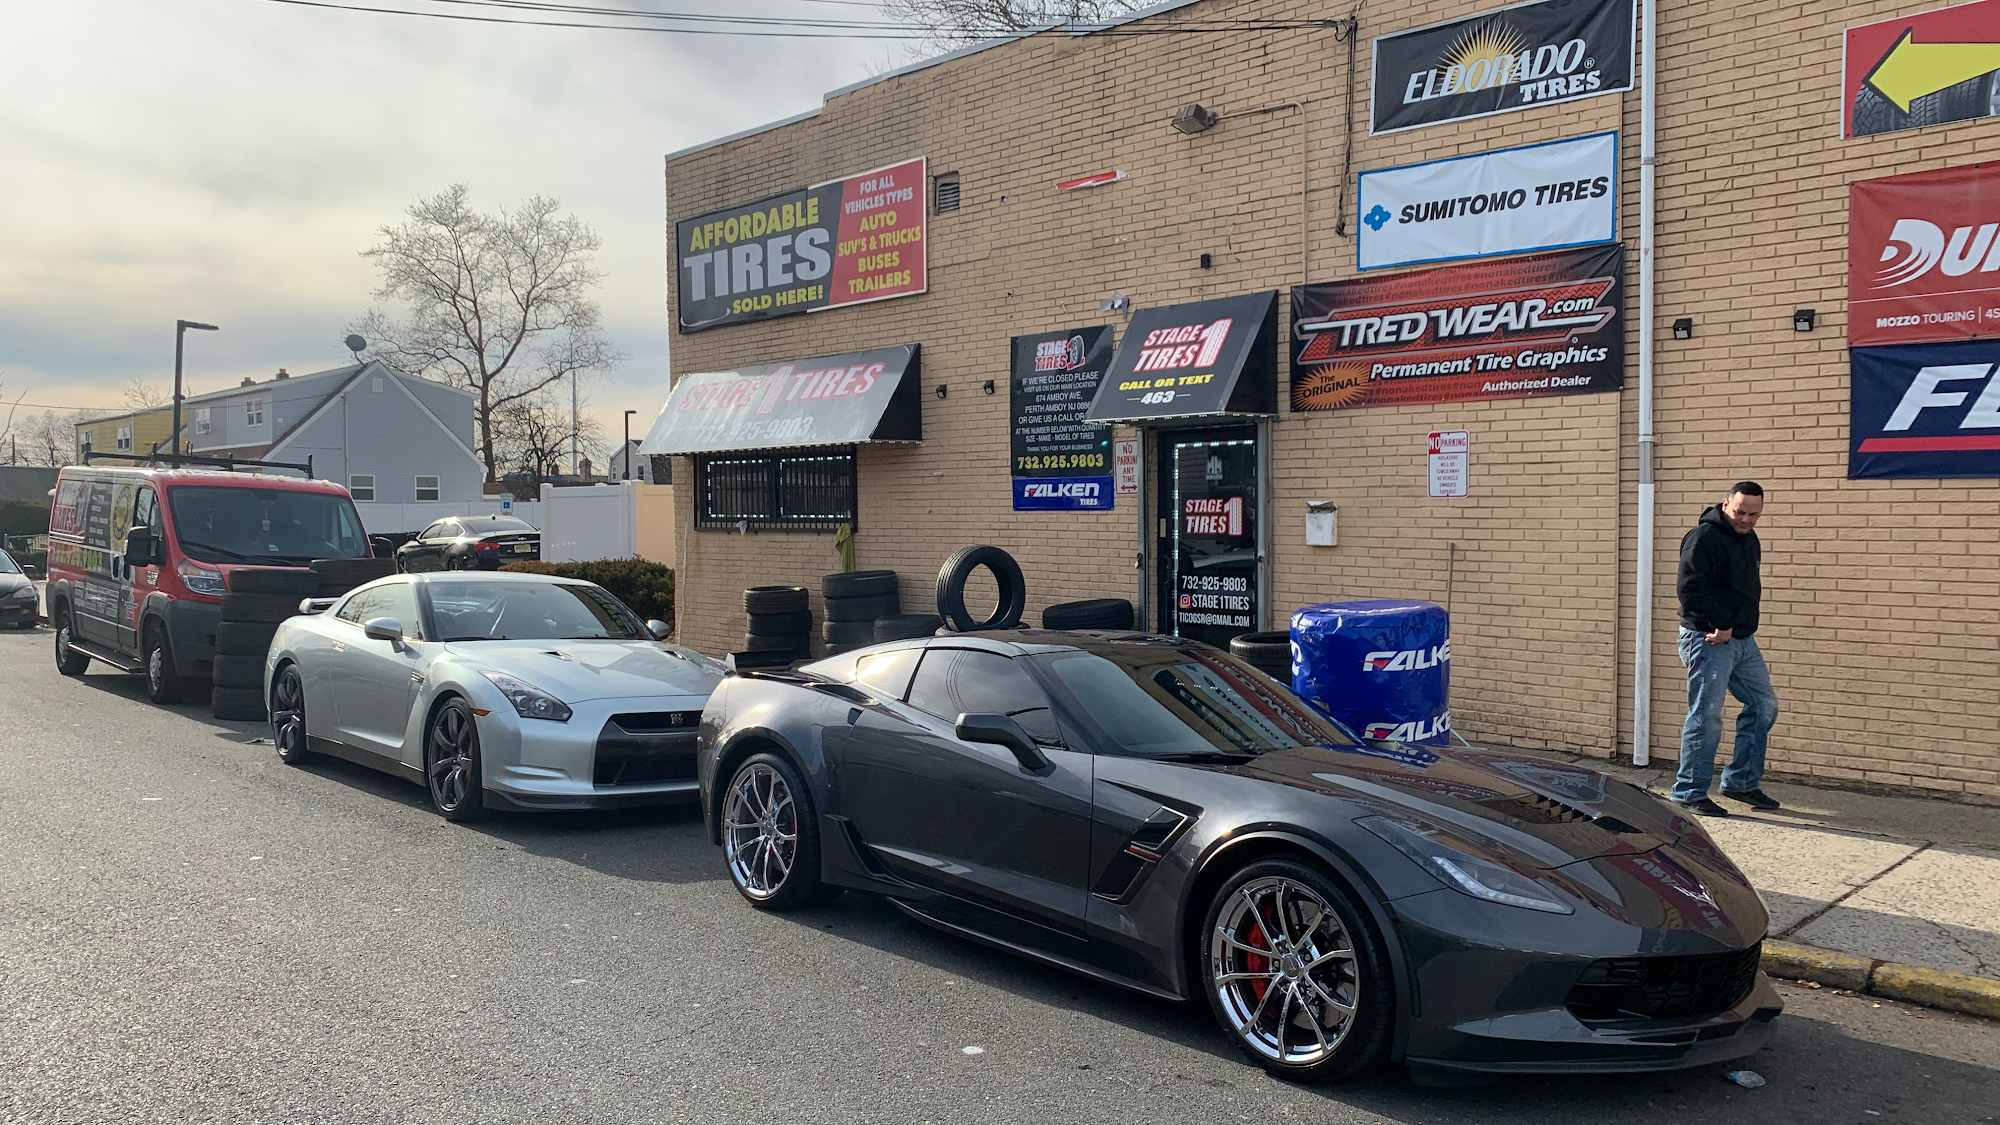 Stage1 Tires - Tire Shop, Emergency Flat Tire Change Service, Tire Repair in Perth Amboy, NJ